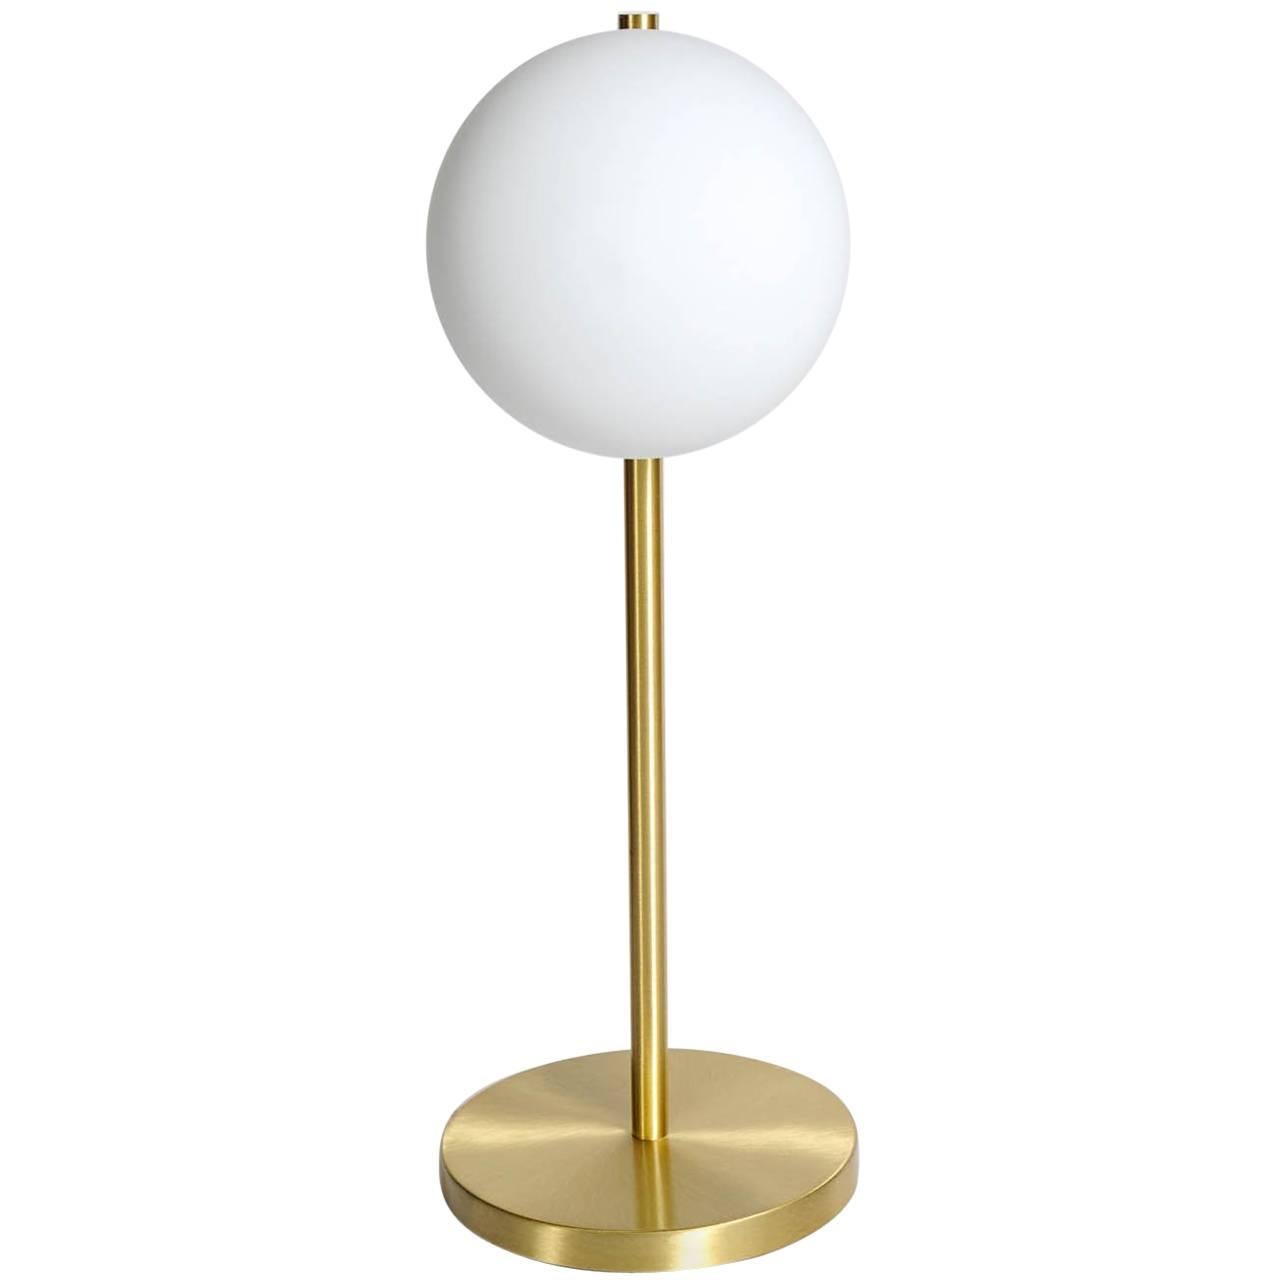 Satin Brass Table Lamp with Round White Glass Globe